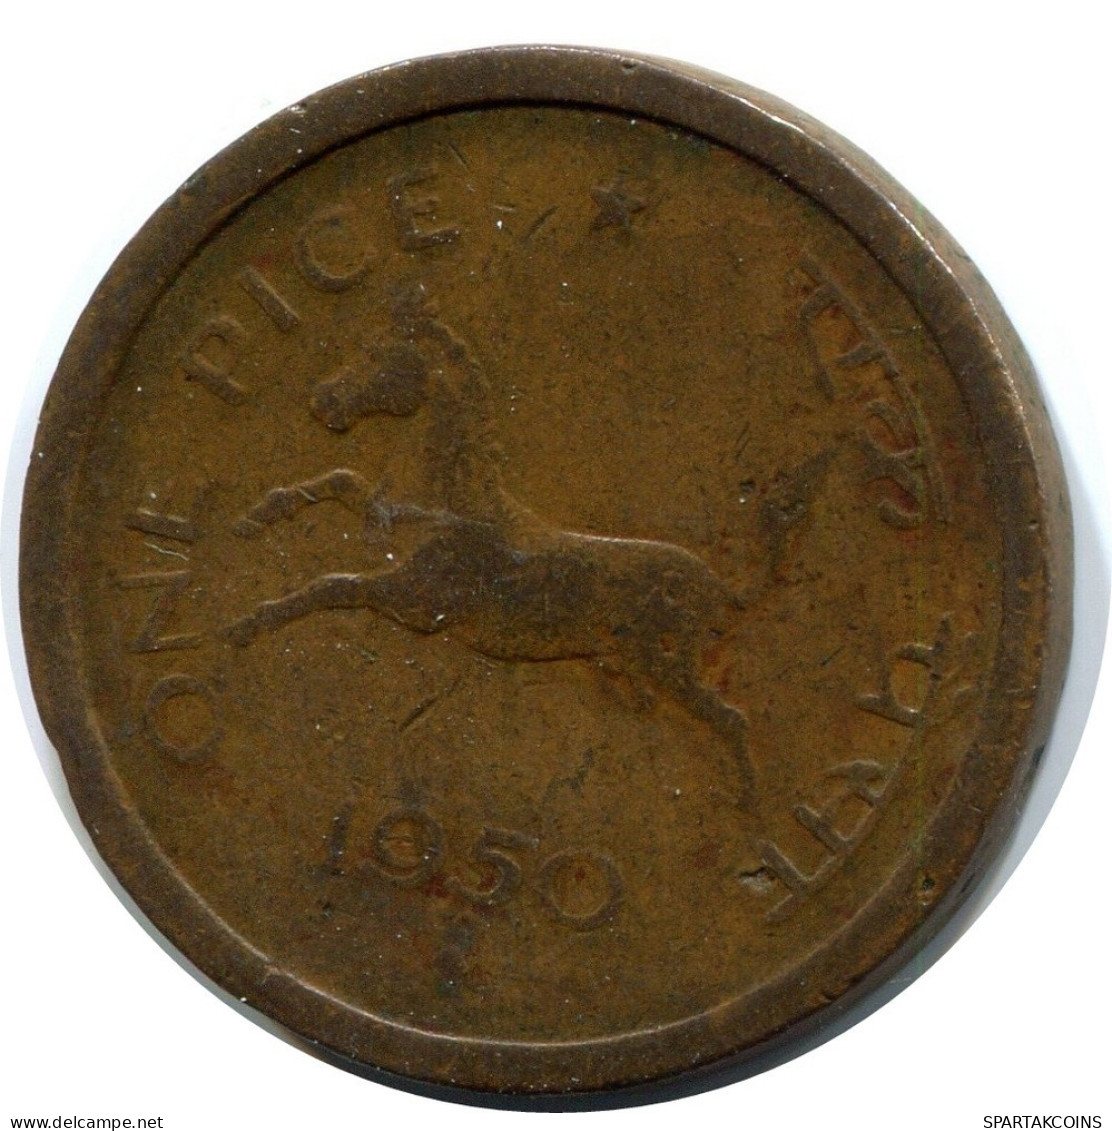 1 PICE 1950 INDIEN INDIA Münze #AY949.D.A - Indien